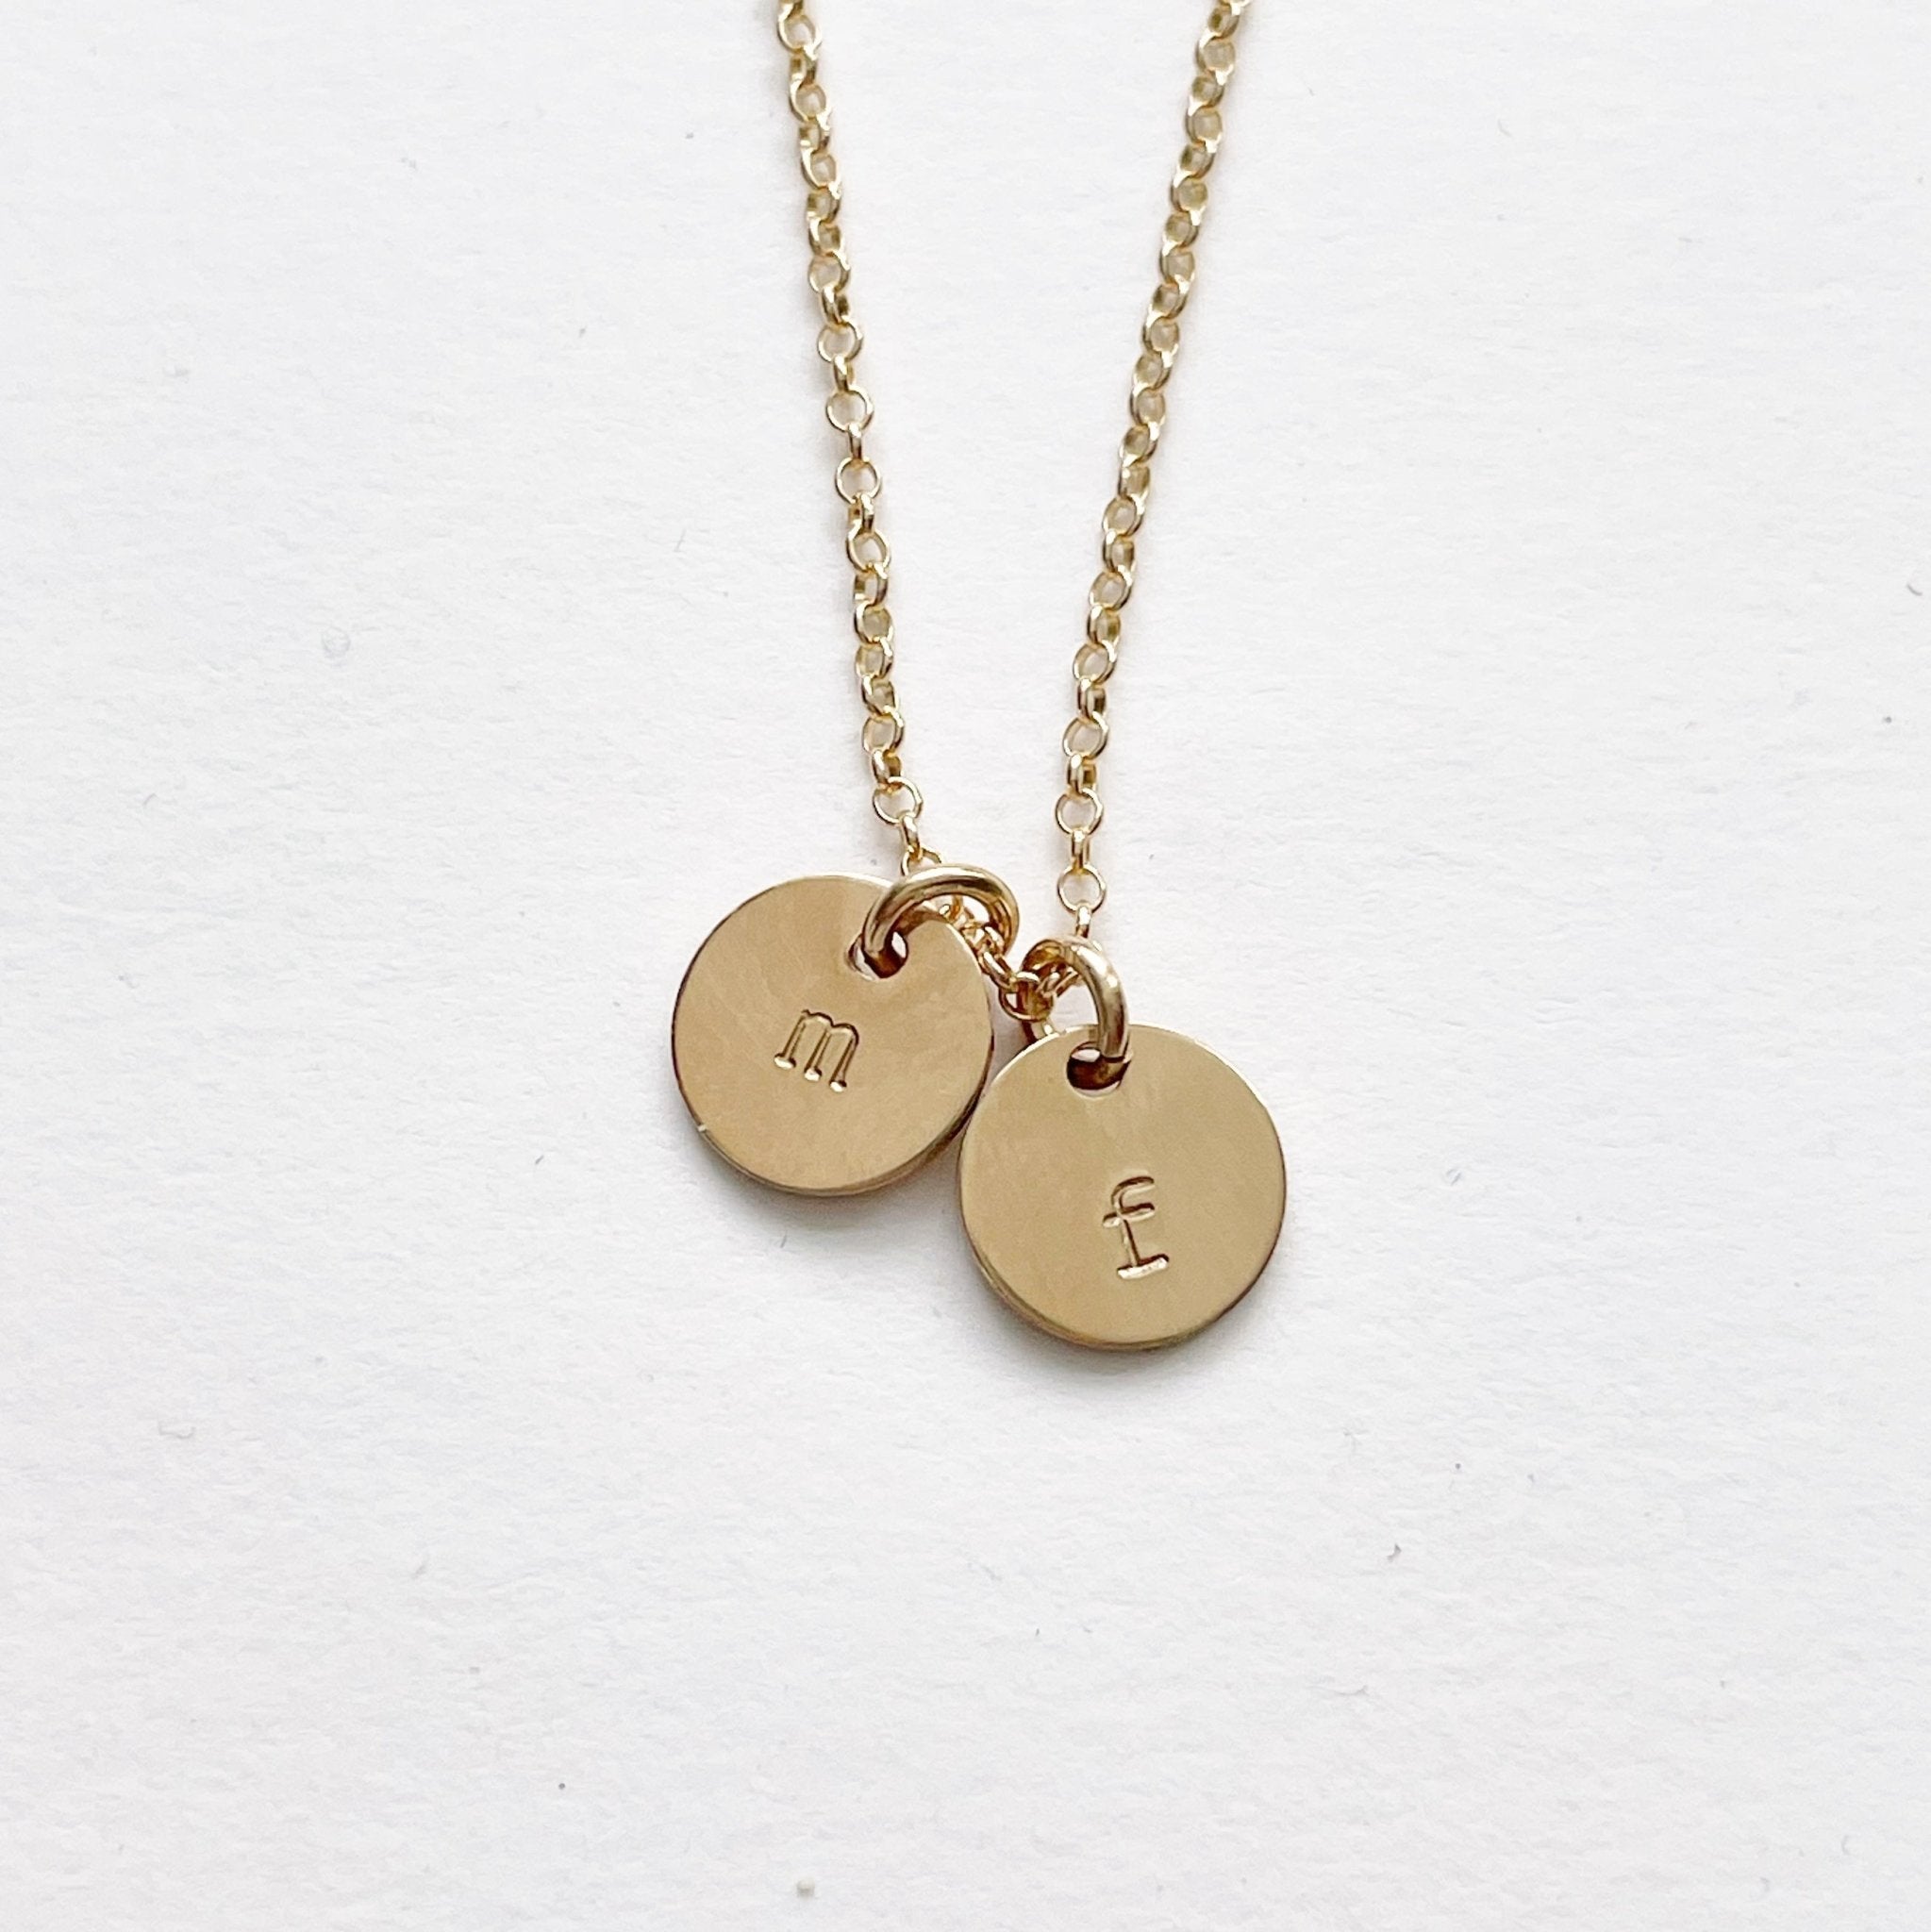 Gold stamped disc personalized initial necklace with 2 gold stamped discs with initials. Tabby Necklace by Sarah Cornwell Jewelry